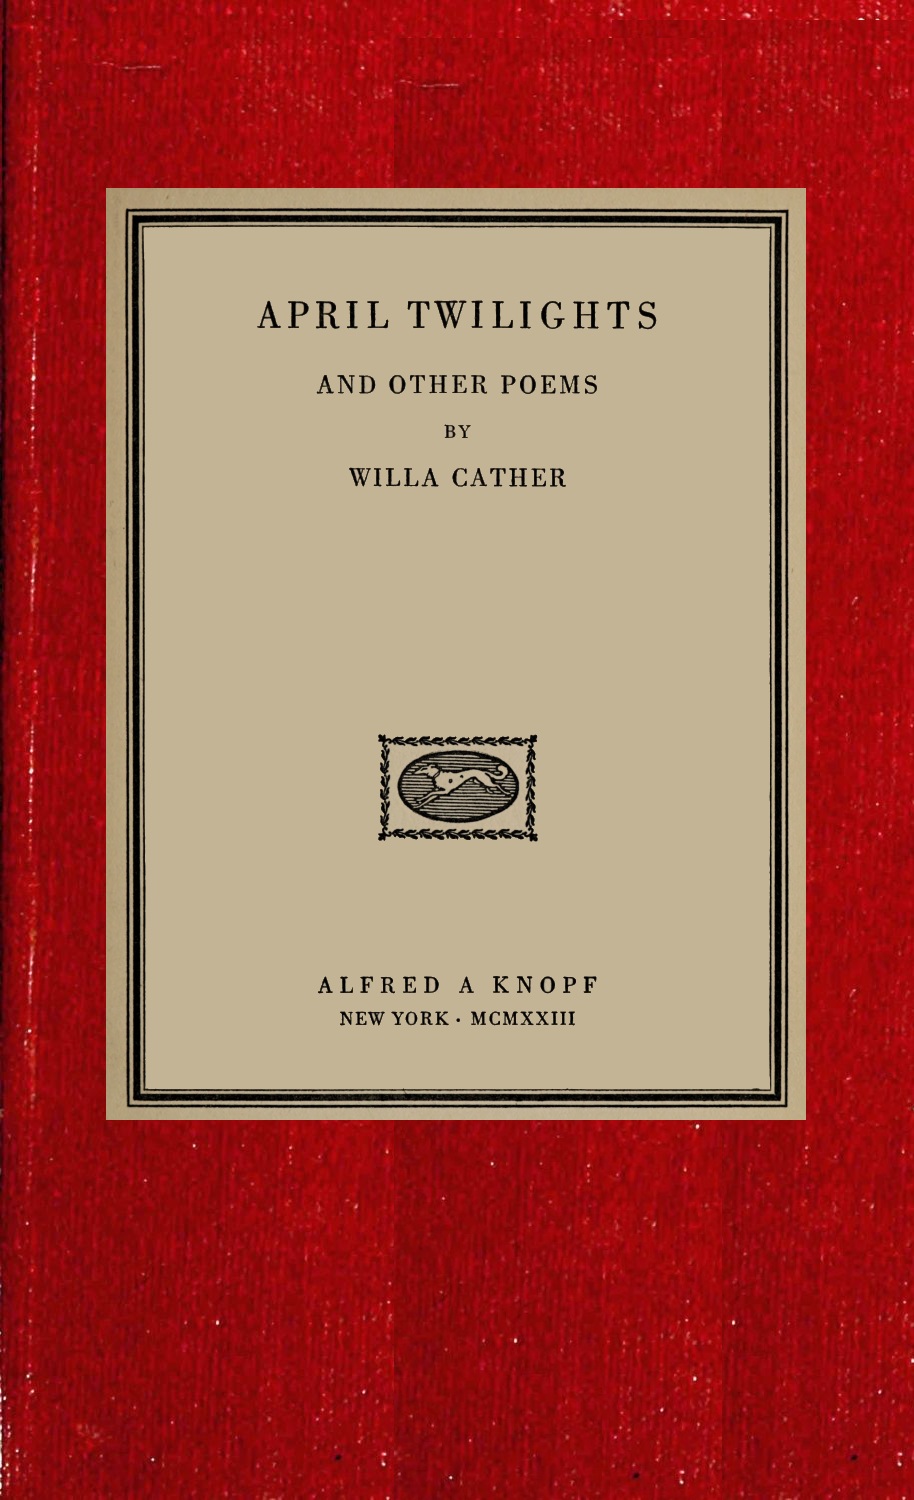 April twilights, and other poems